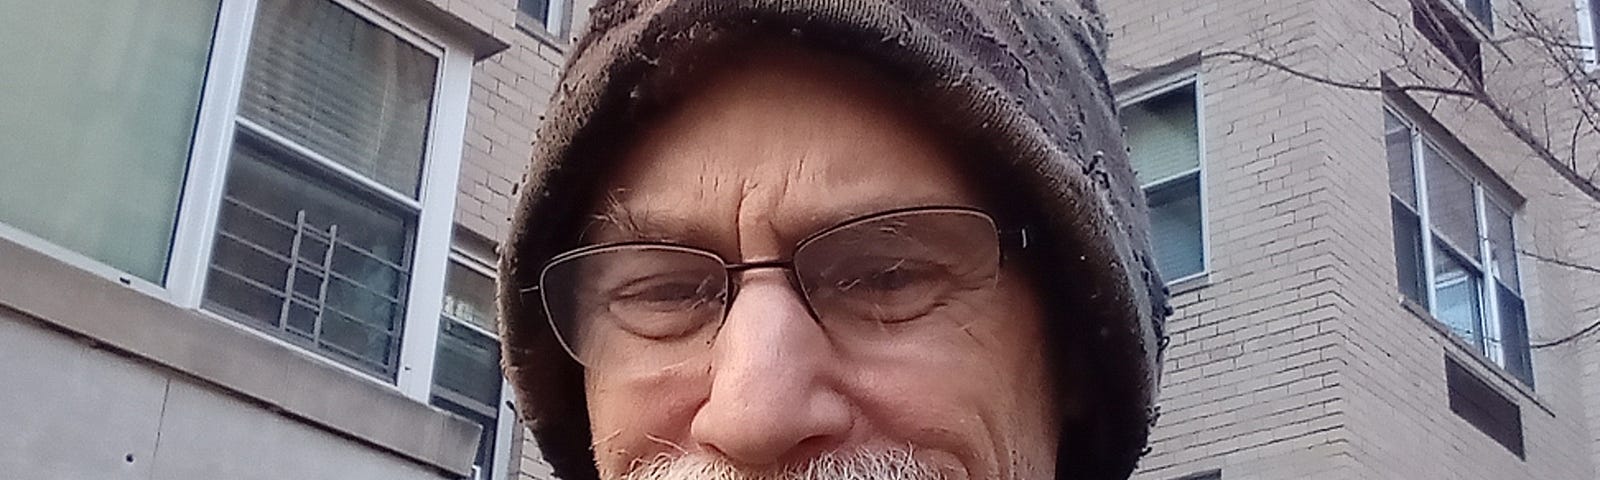 photo of man with a mustache and glasses wearing a knit cap in winter